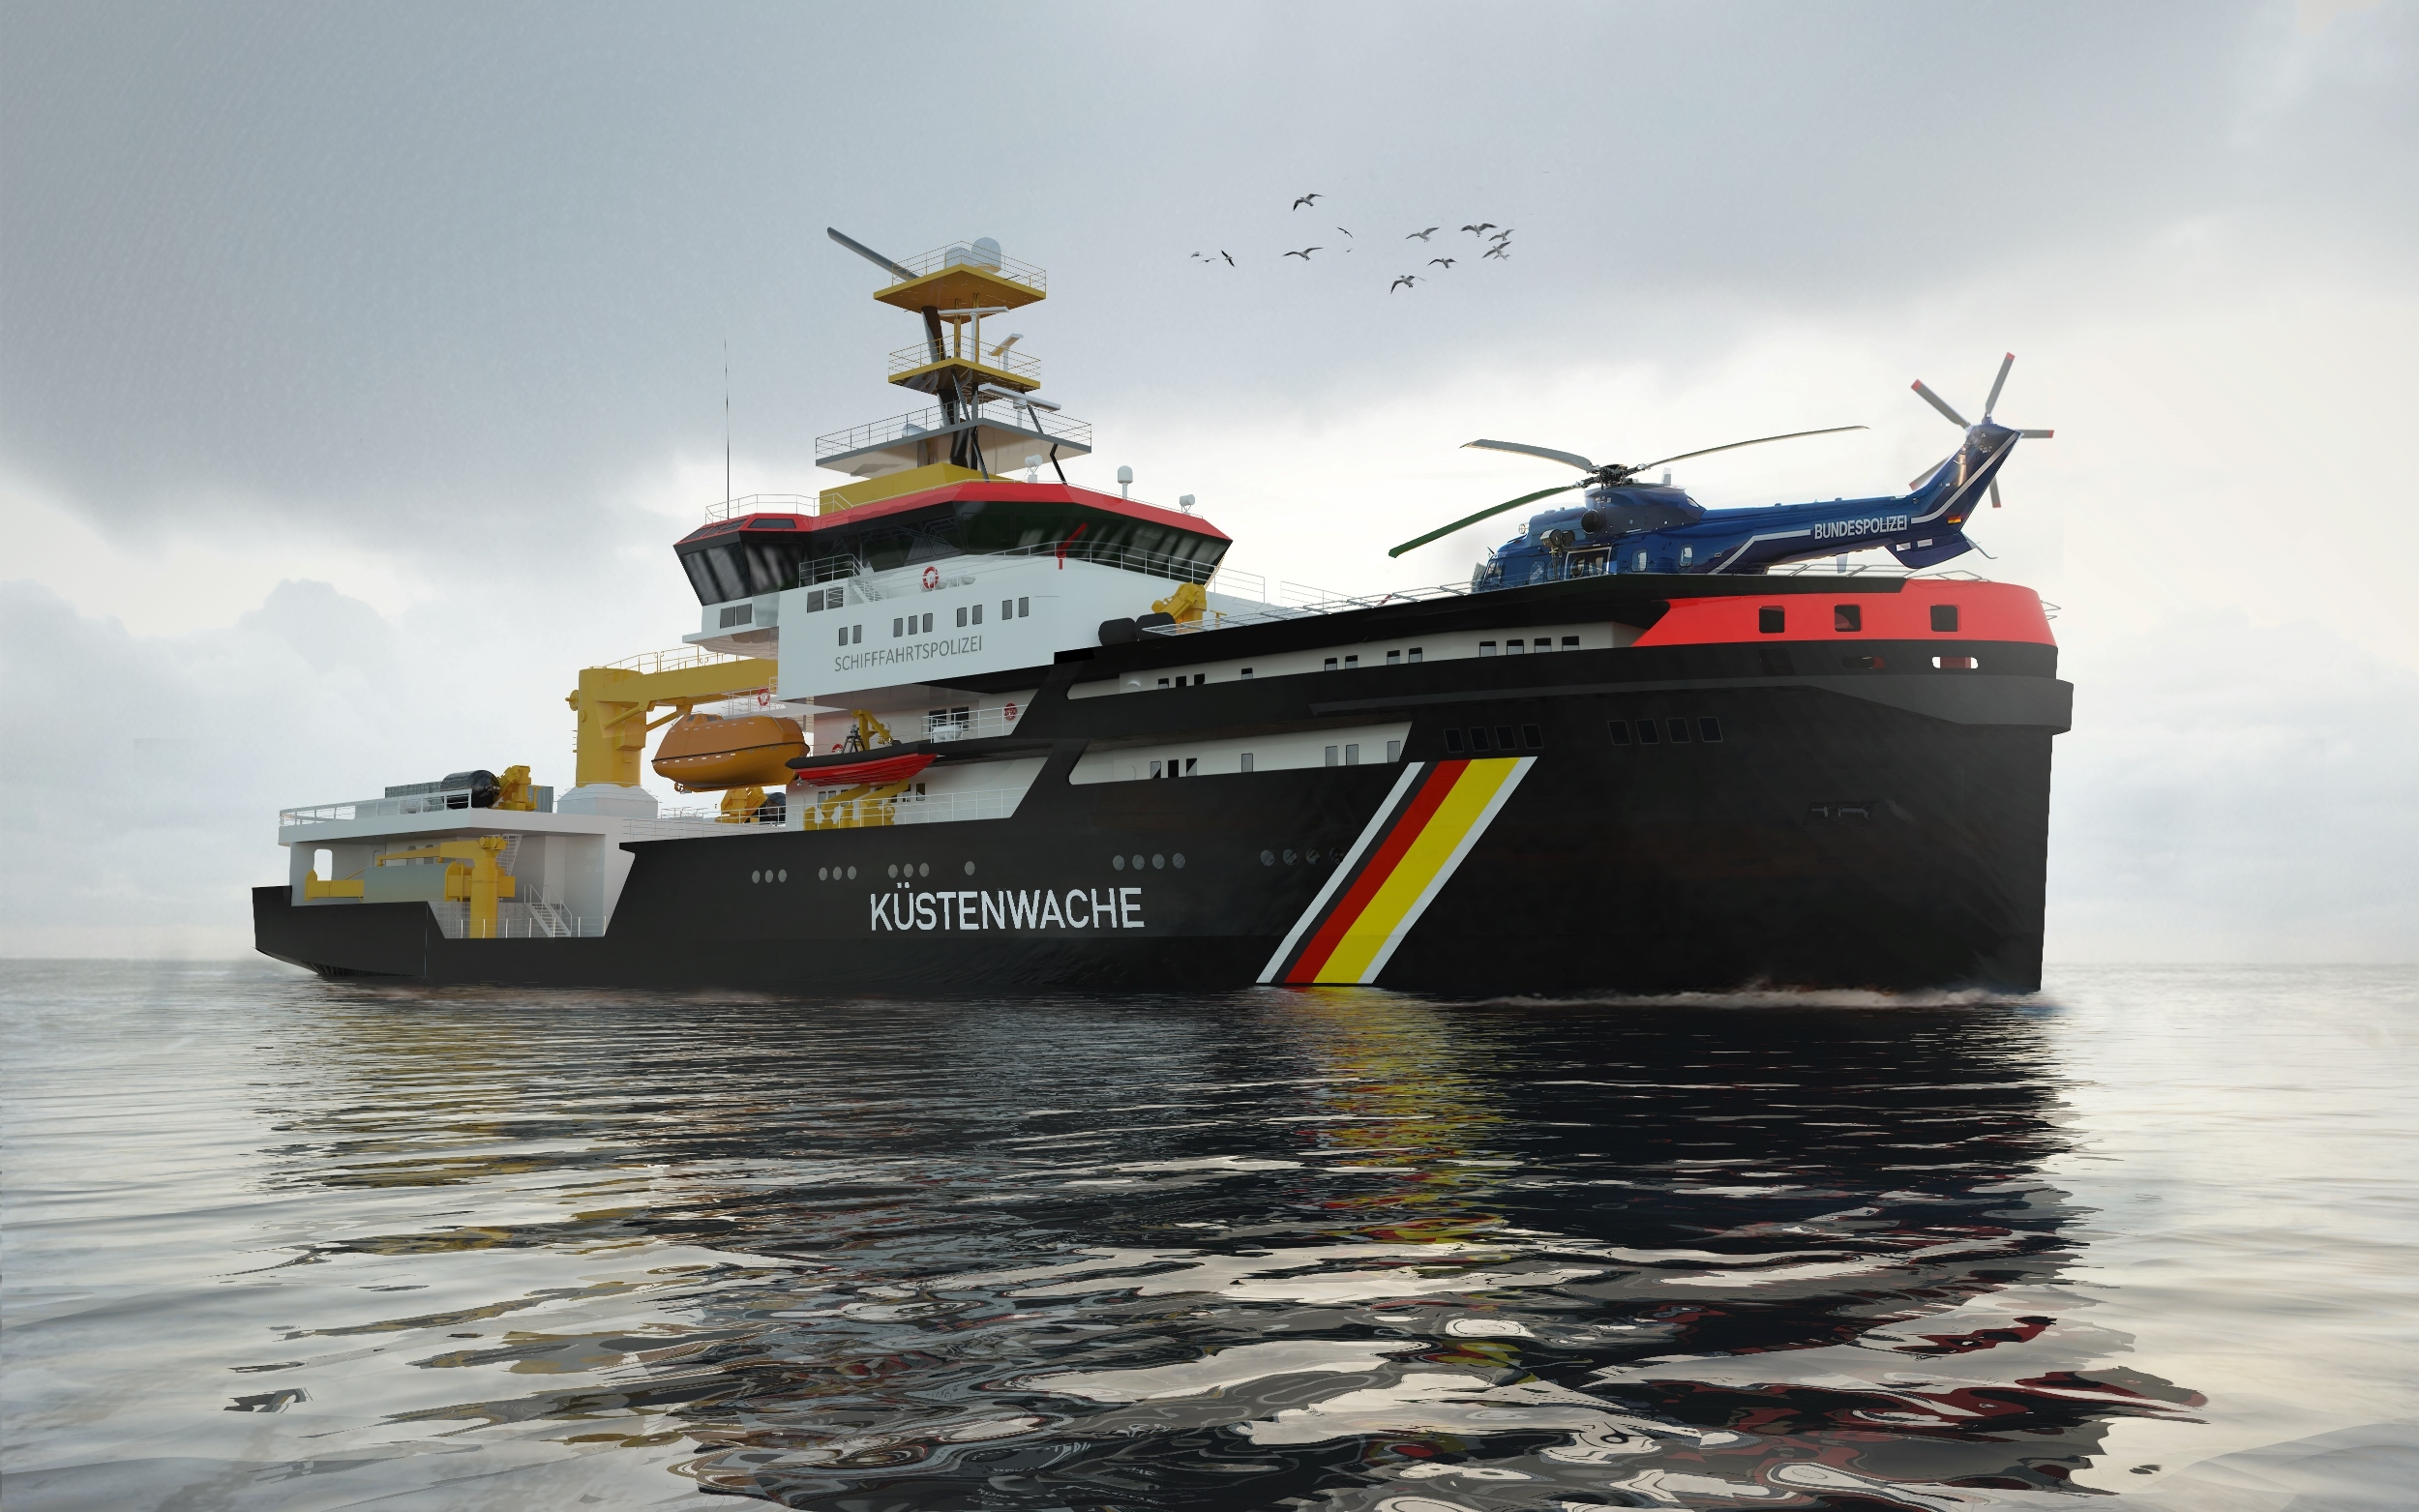 Høglund provides LNG solutions to three German vessels in hazardous roles